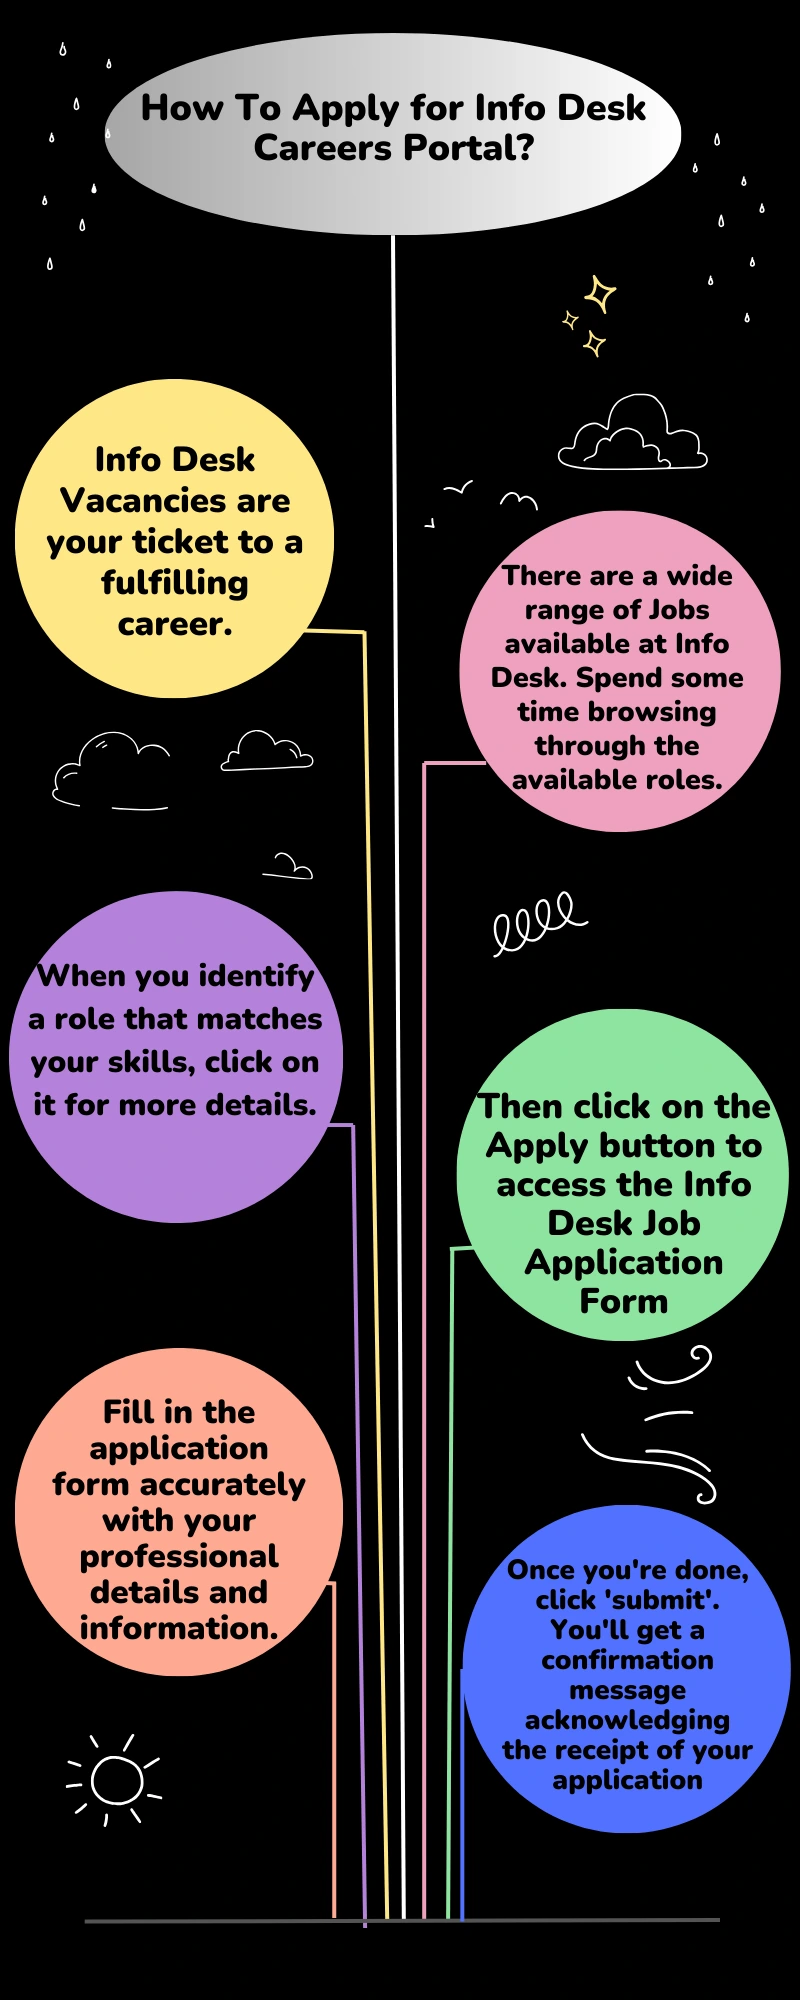 How To Apply for Info Desk Careers Portal?